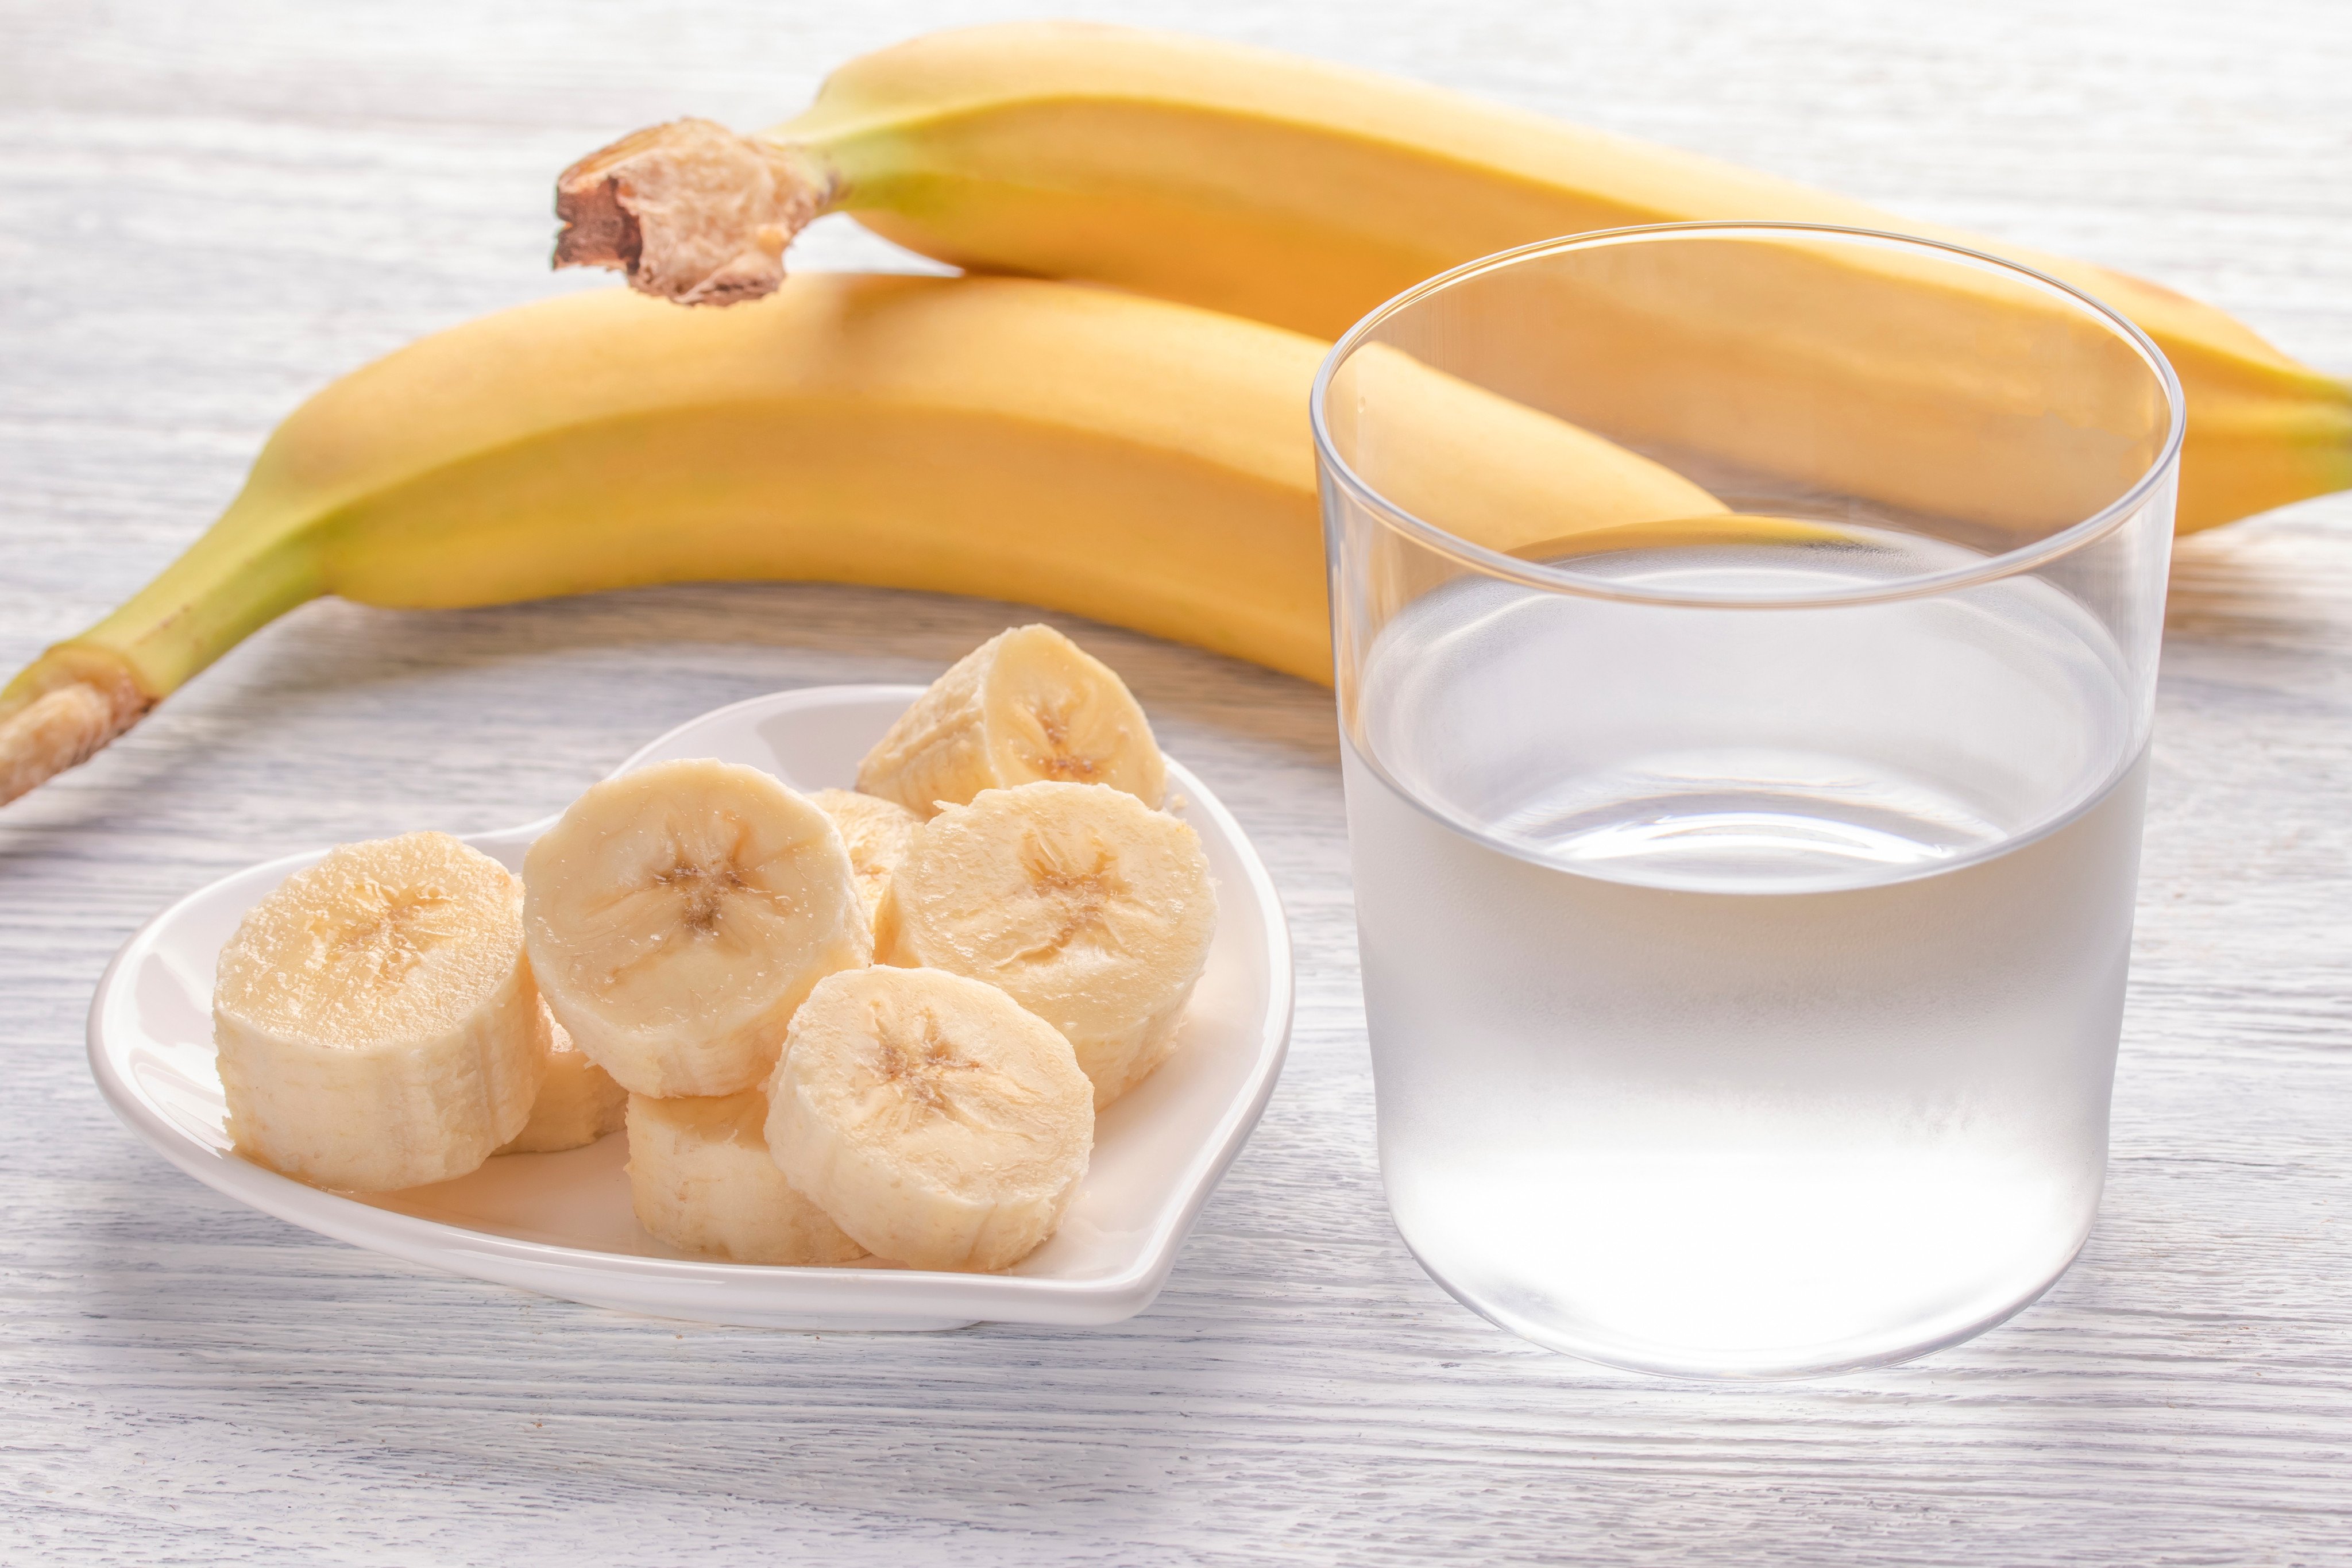 The Morning Banana Diet, which prescribes eating bananas for breakfast to lose weight, is back in vogue. We look at why there’s more to the diet than meets the eye, as a nutritionist explains how to incorporate it for healthy, long-term weight loss. Photo: Shutterstock